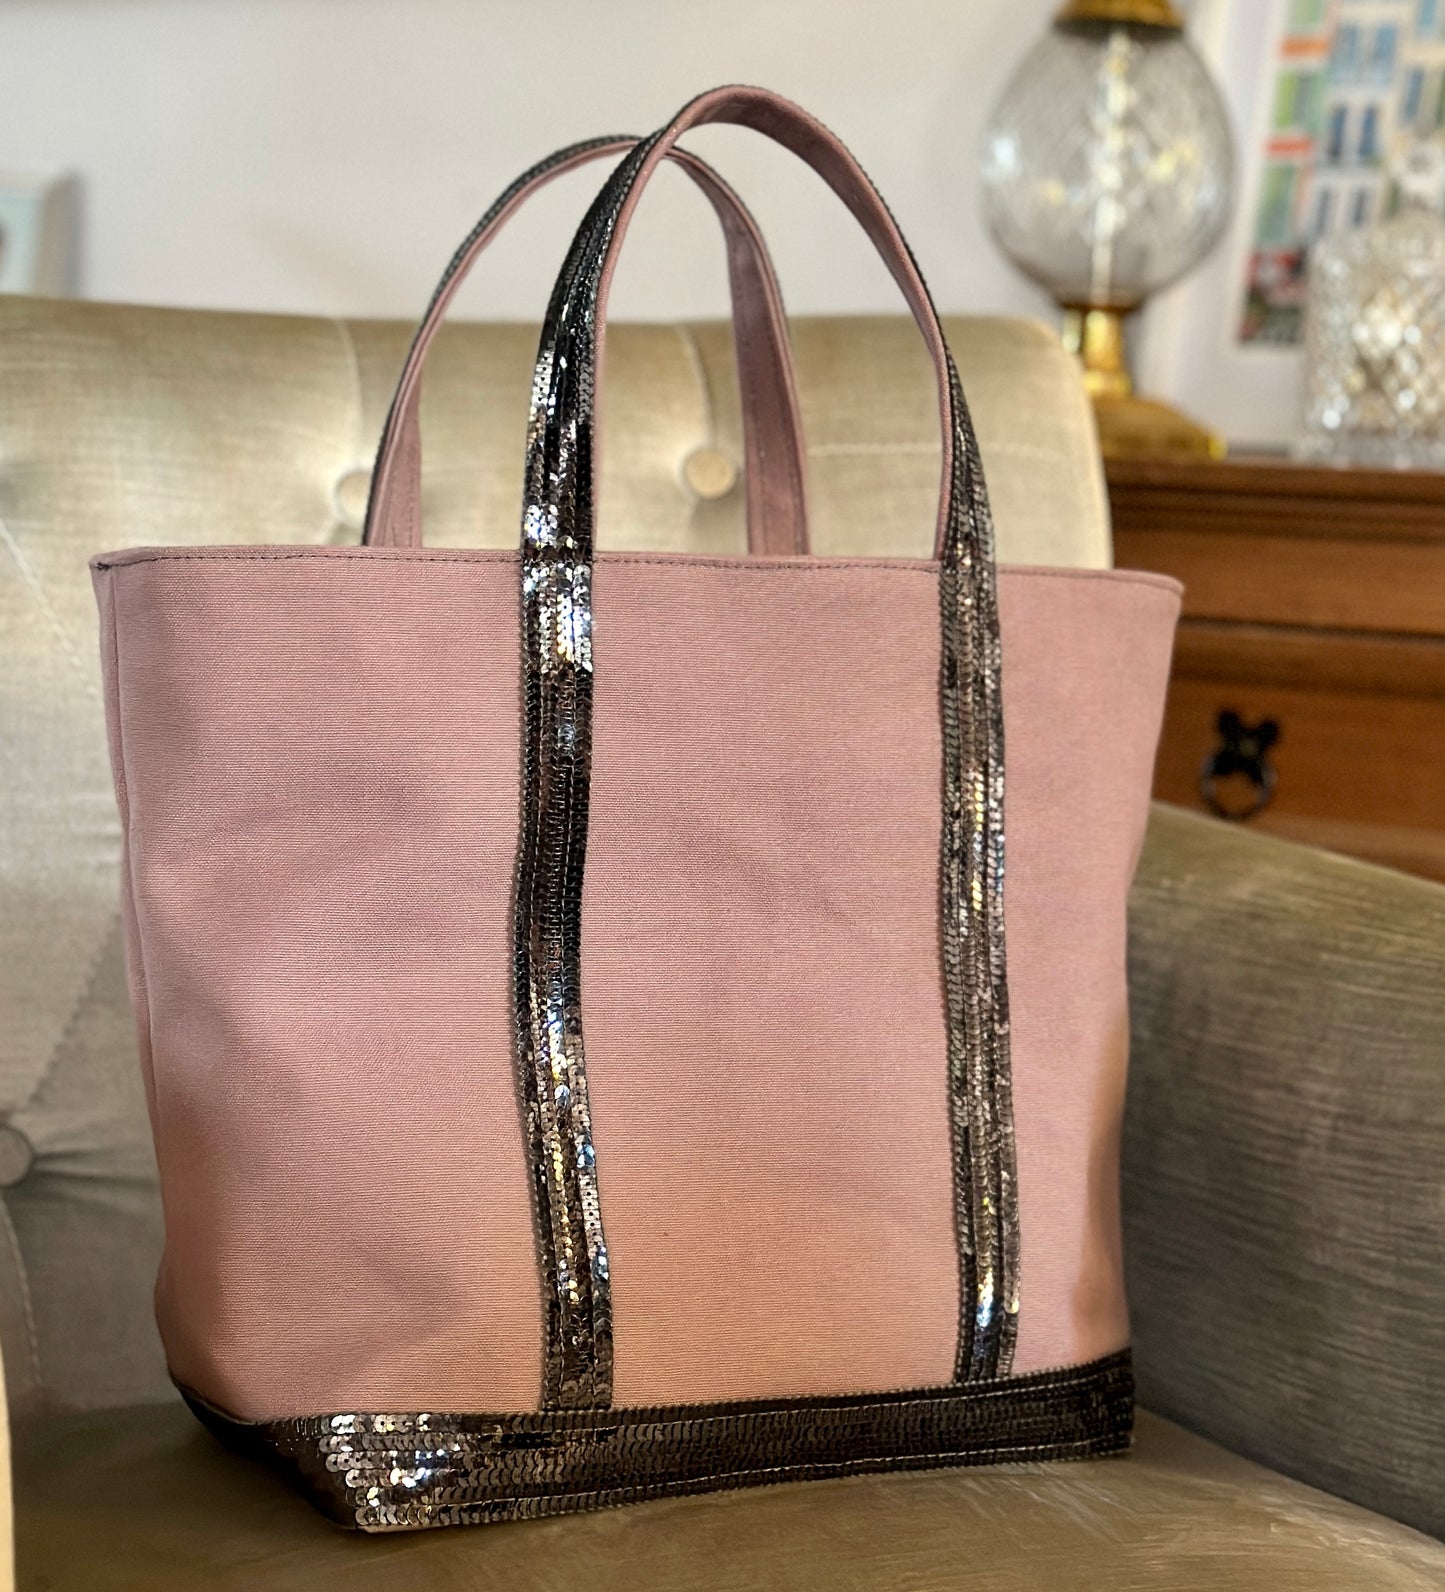 Elegant Purple Tote Bag with Anthracite Gray Sequins, Mauve Shopping Bag with Silver Sequins, Mauve Tote Bag with Dark Gray Sequins